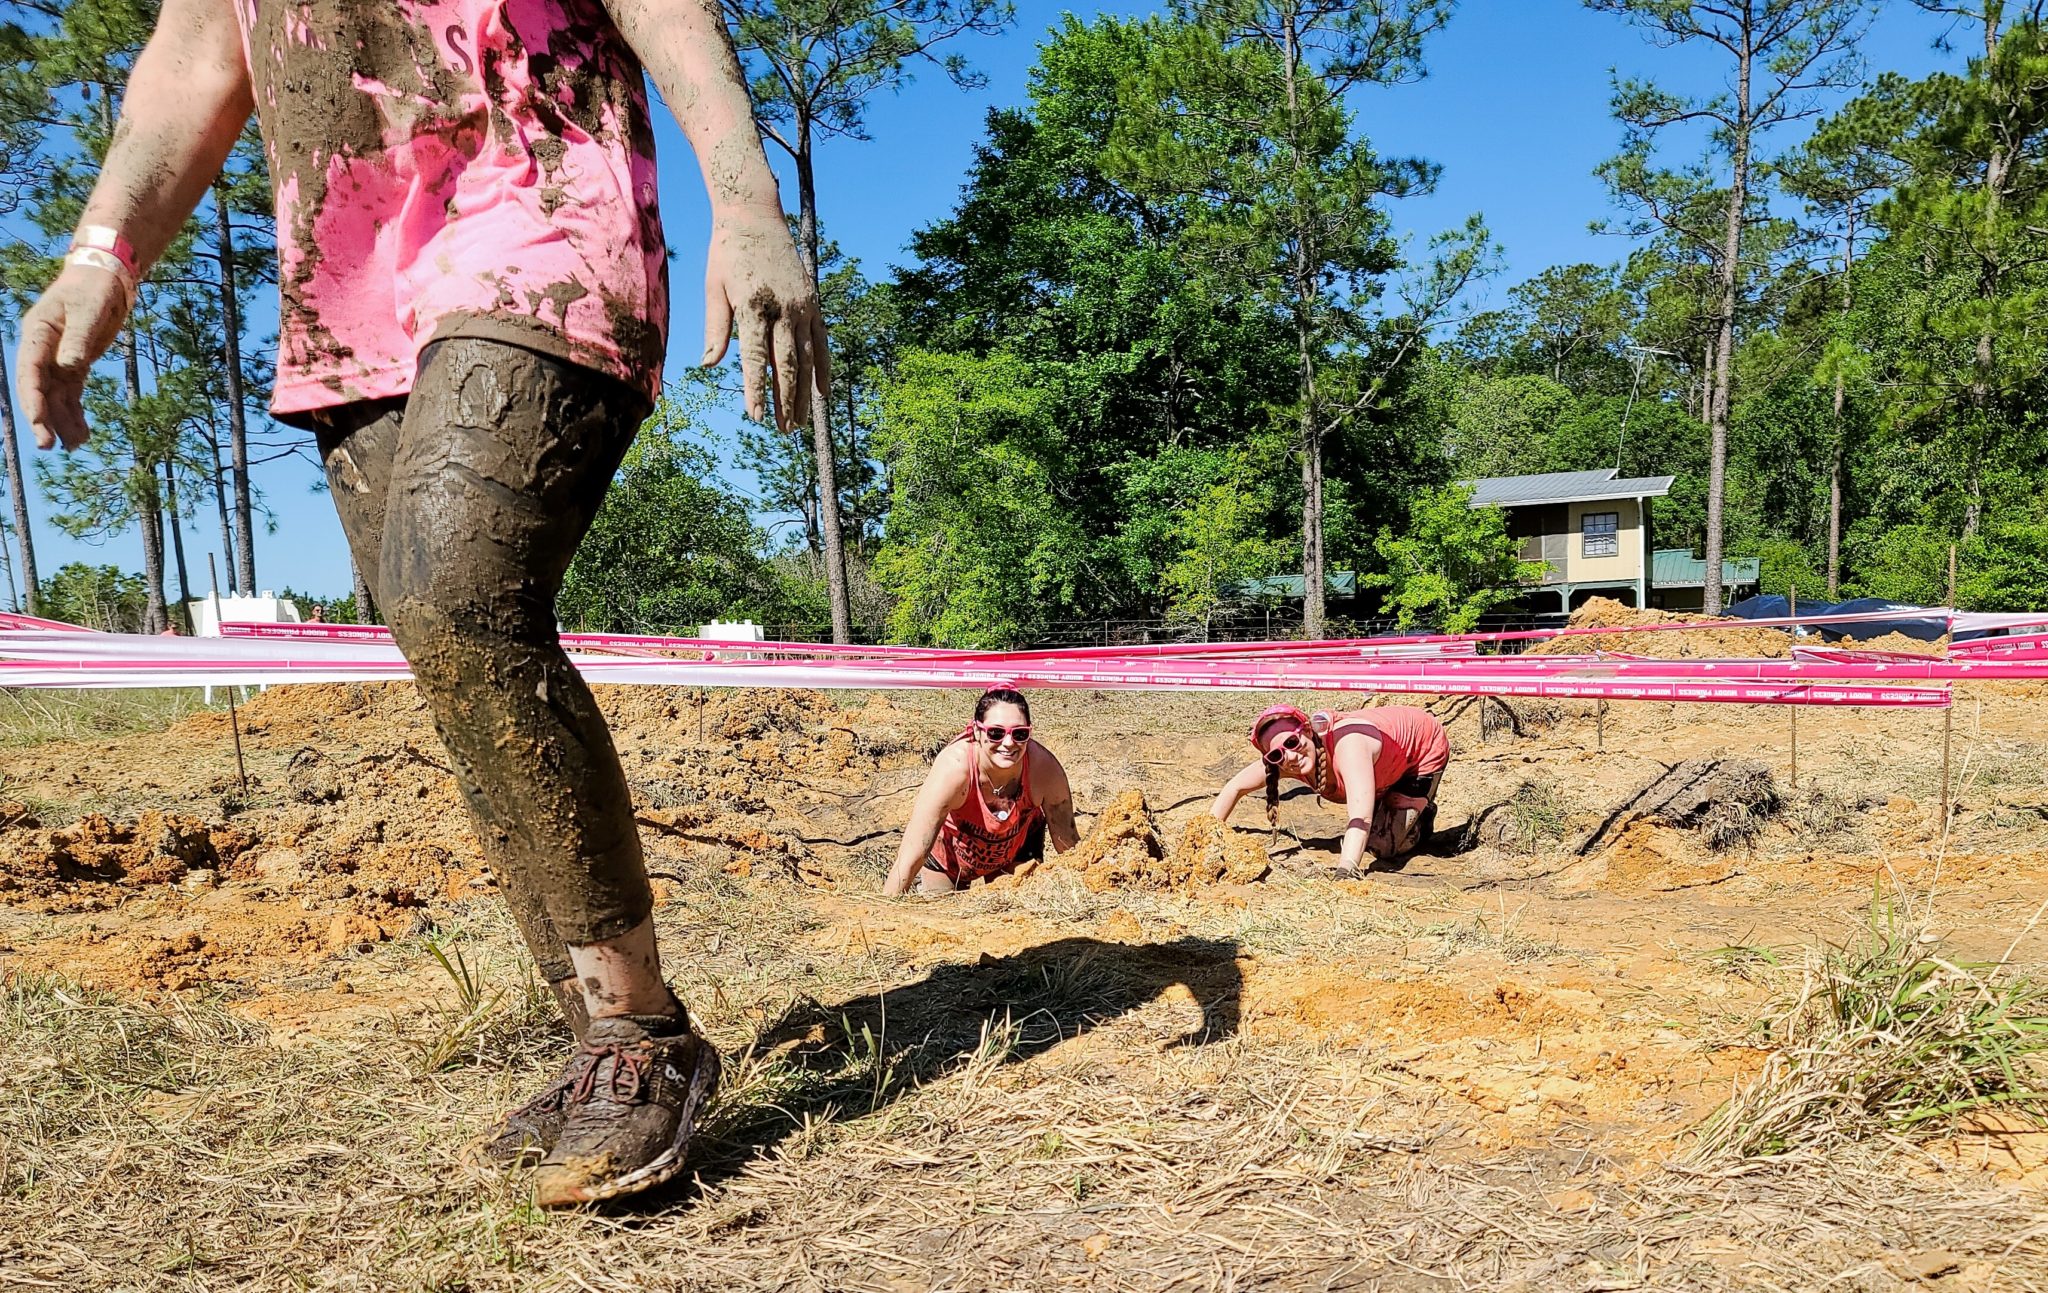 Muddy Princess 5K racers finish messy miles for breast cancer awareness